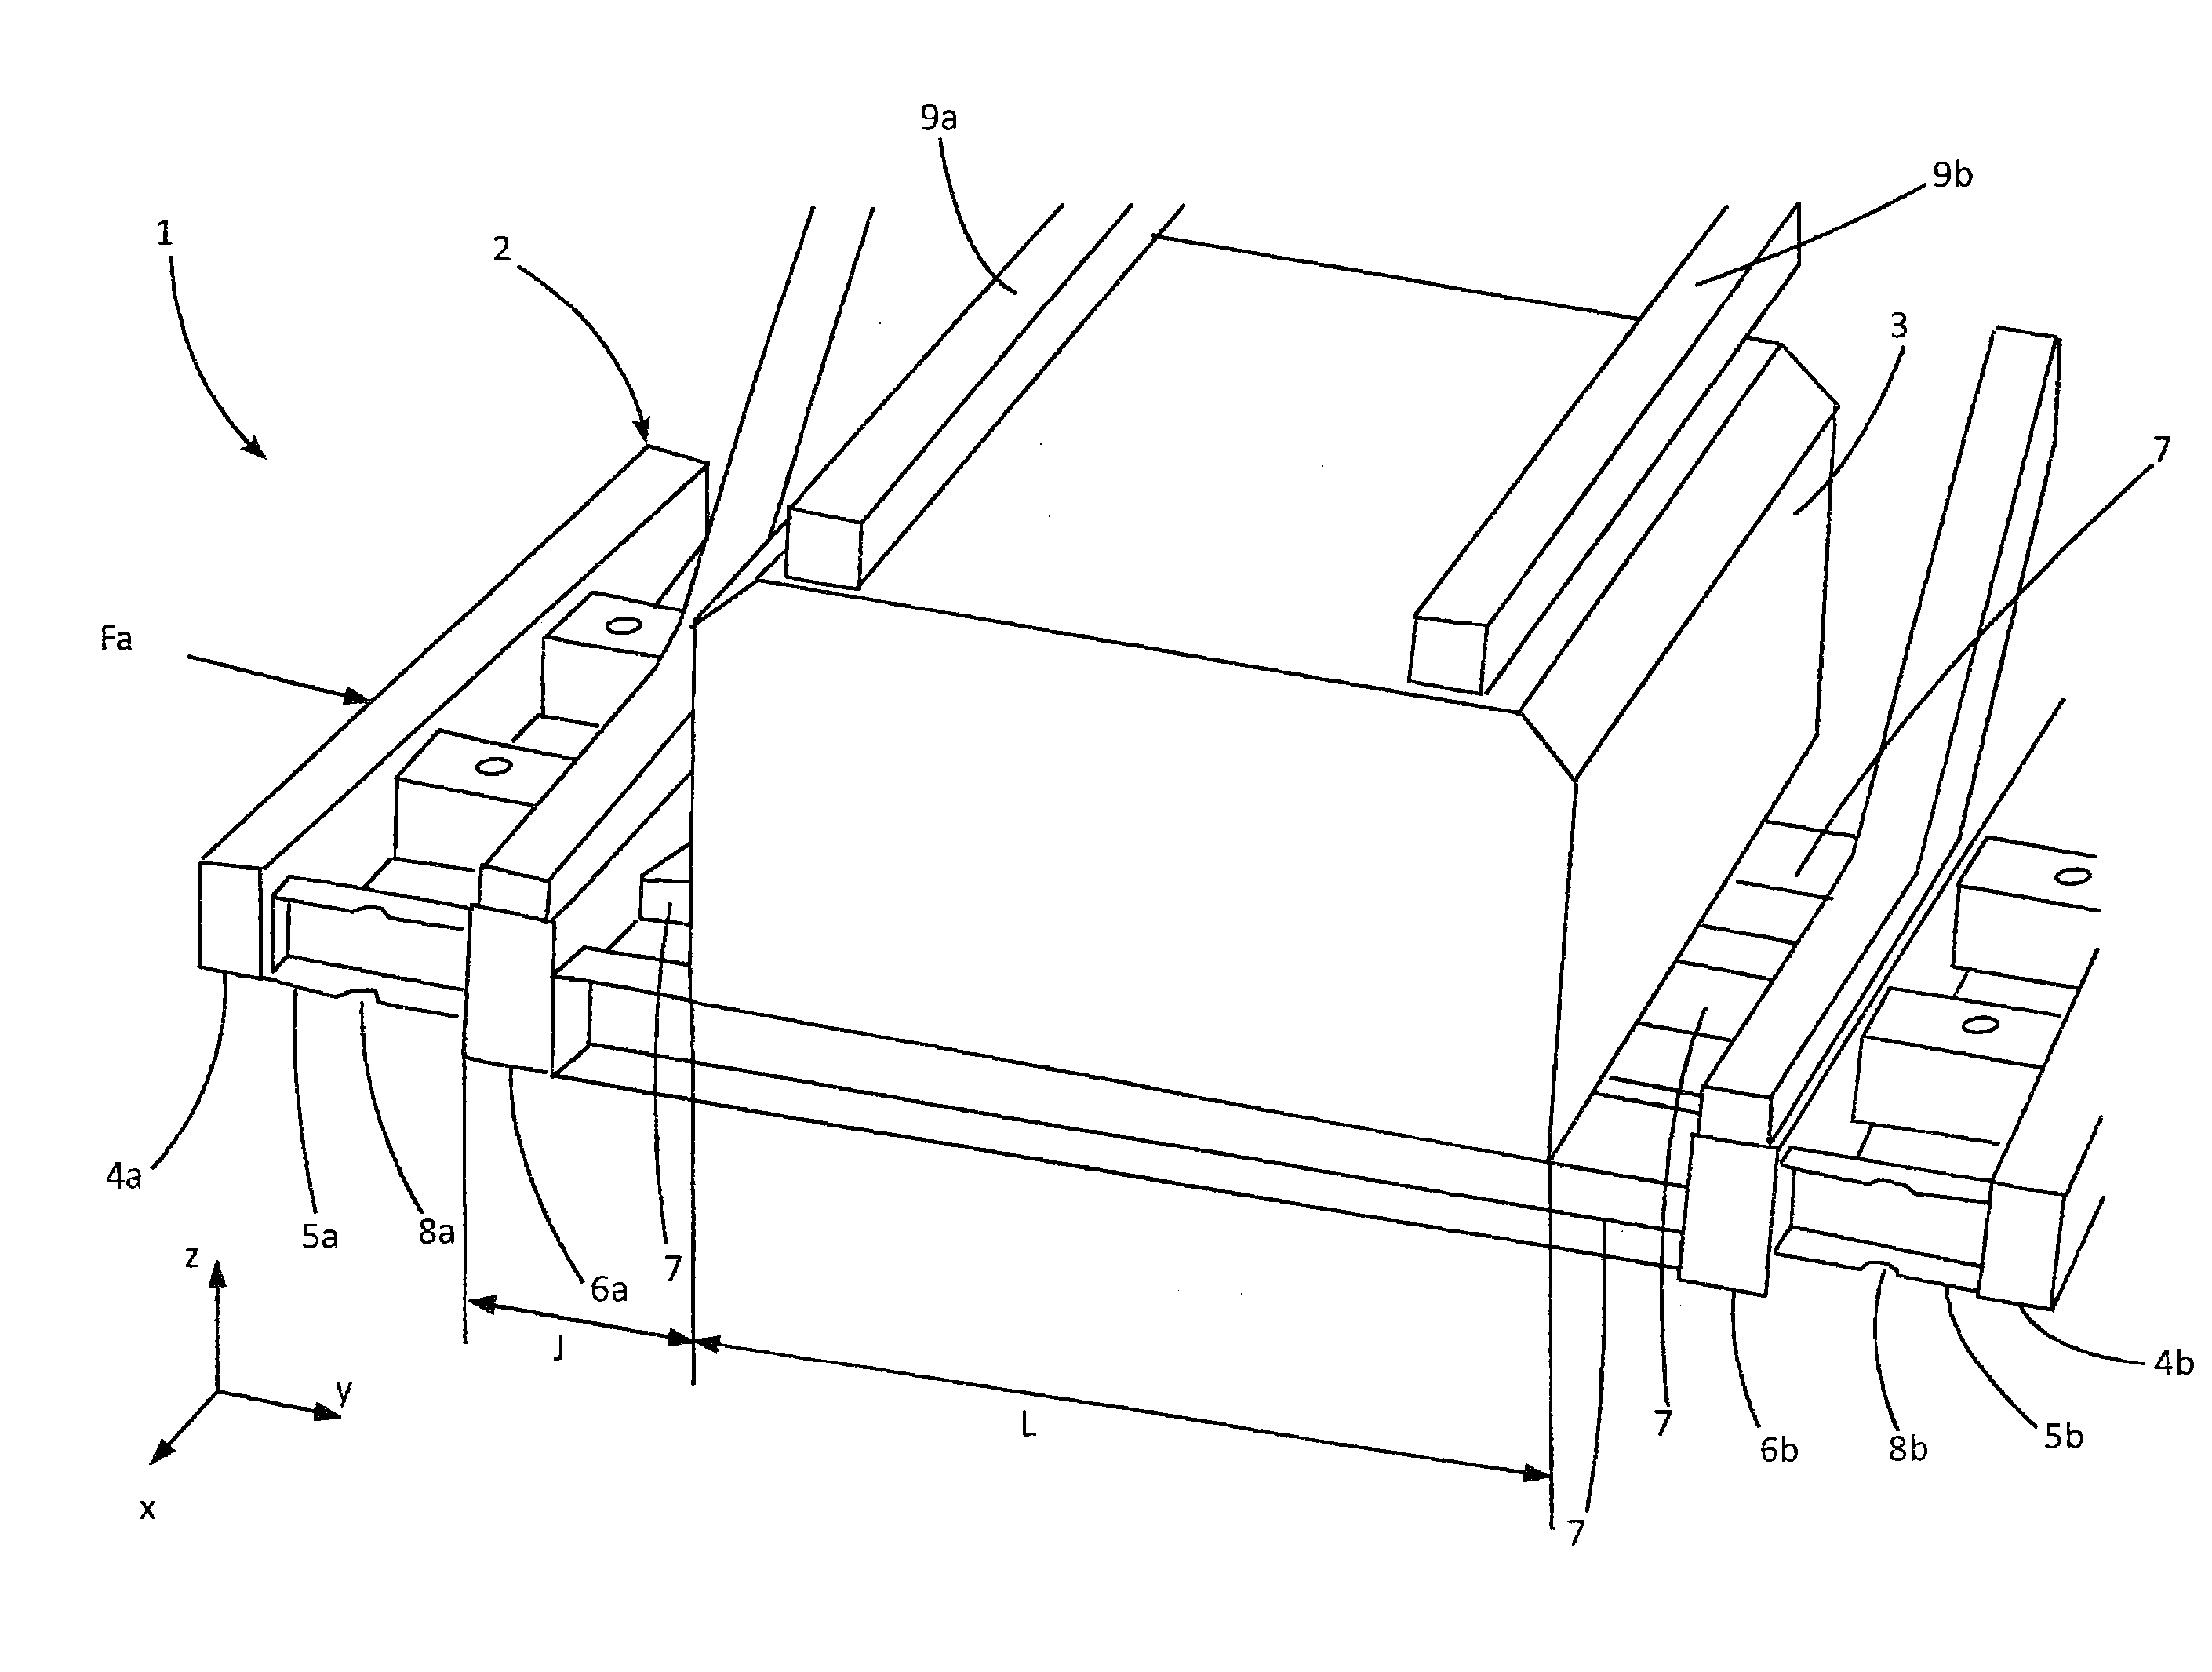 Structure intended to hold an electric battery for powering an electric motor for driving a motor vehicle